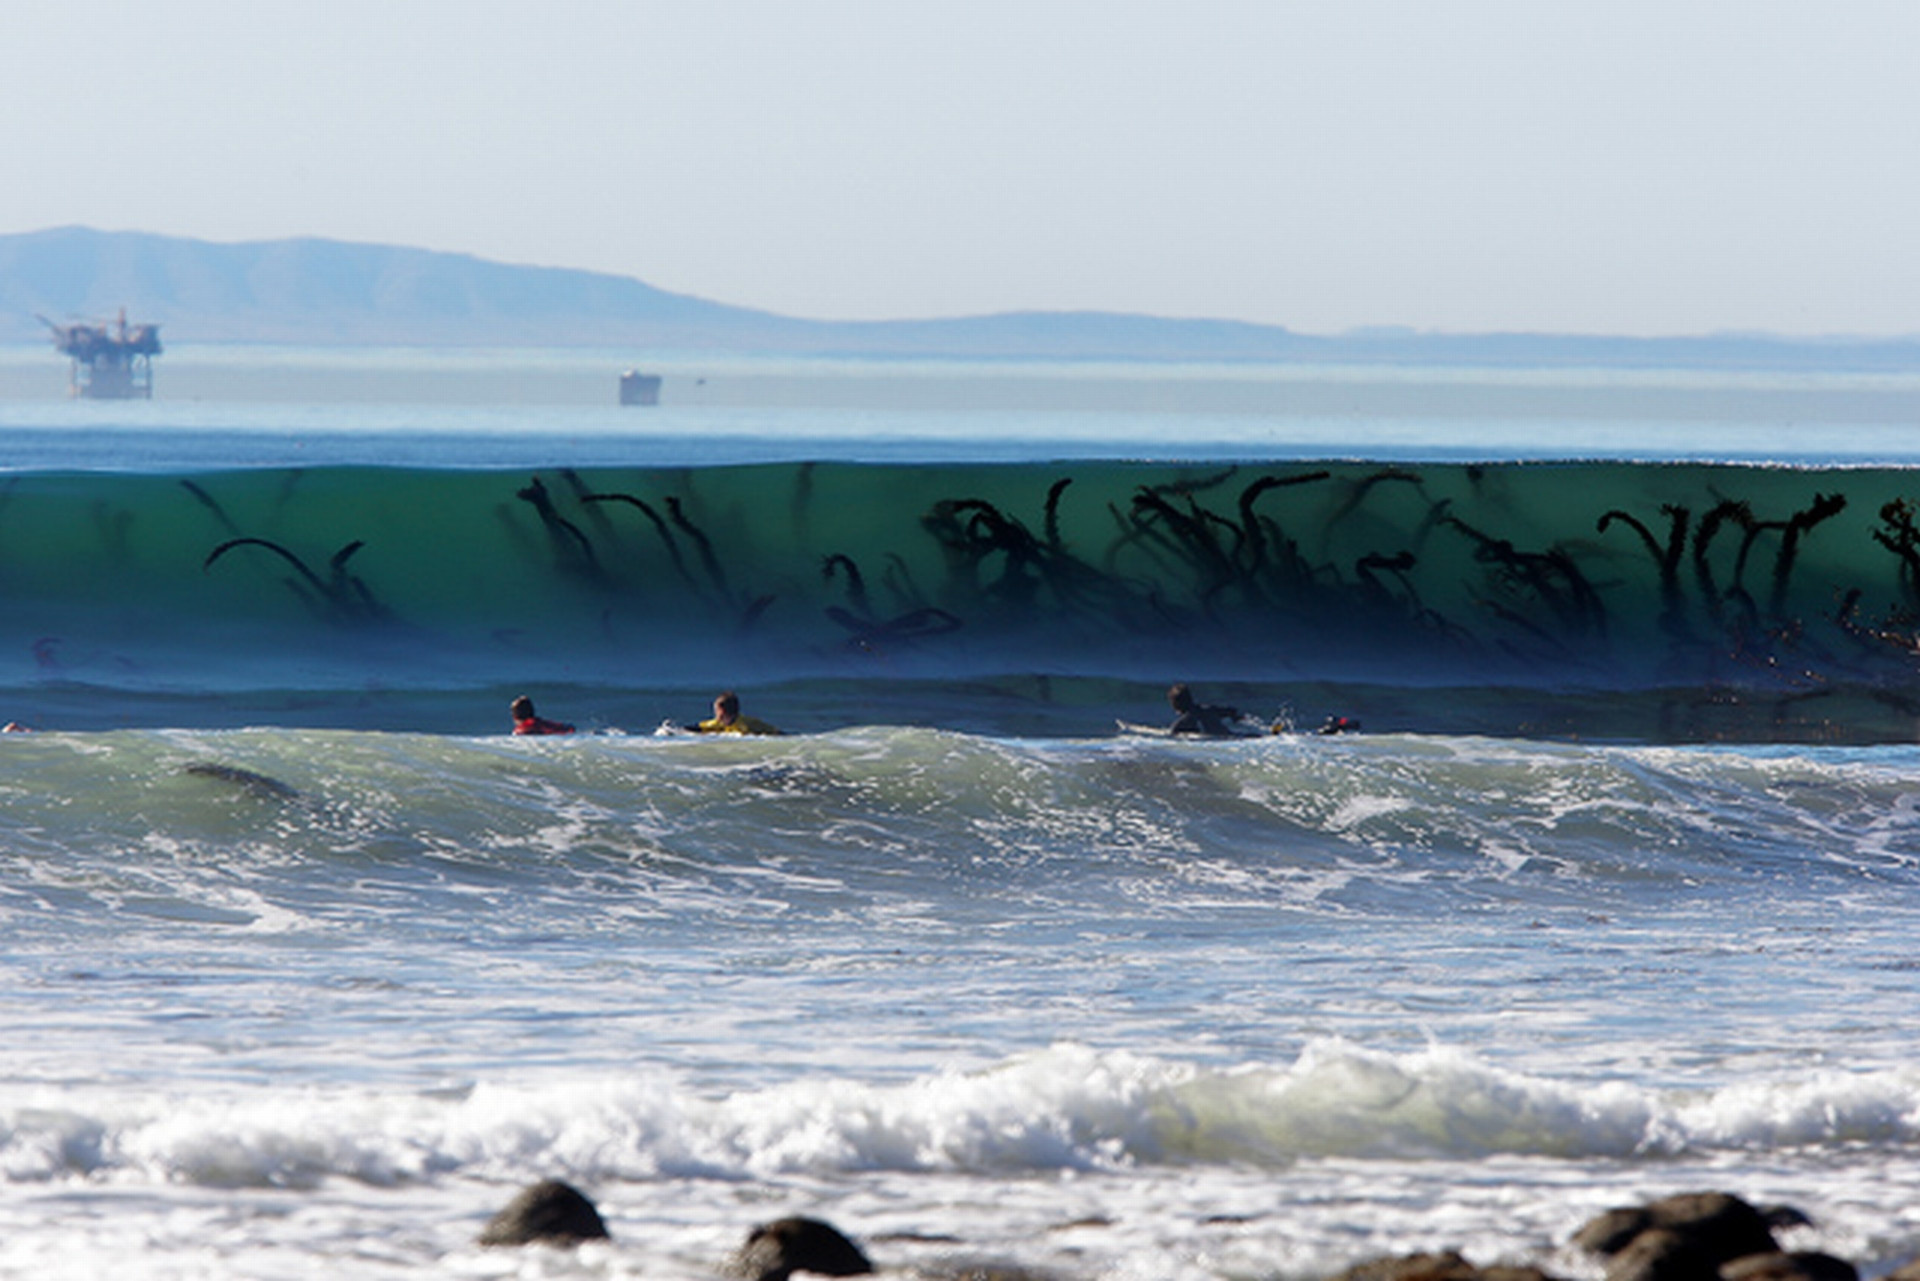 Seaweed appearing as giant monster in the waves.